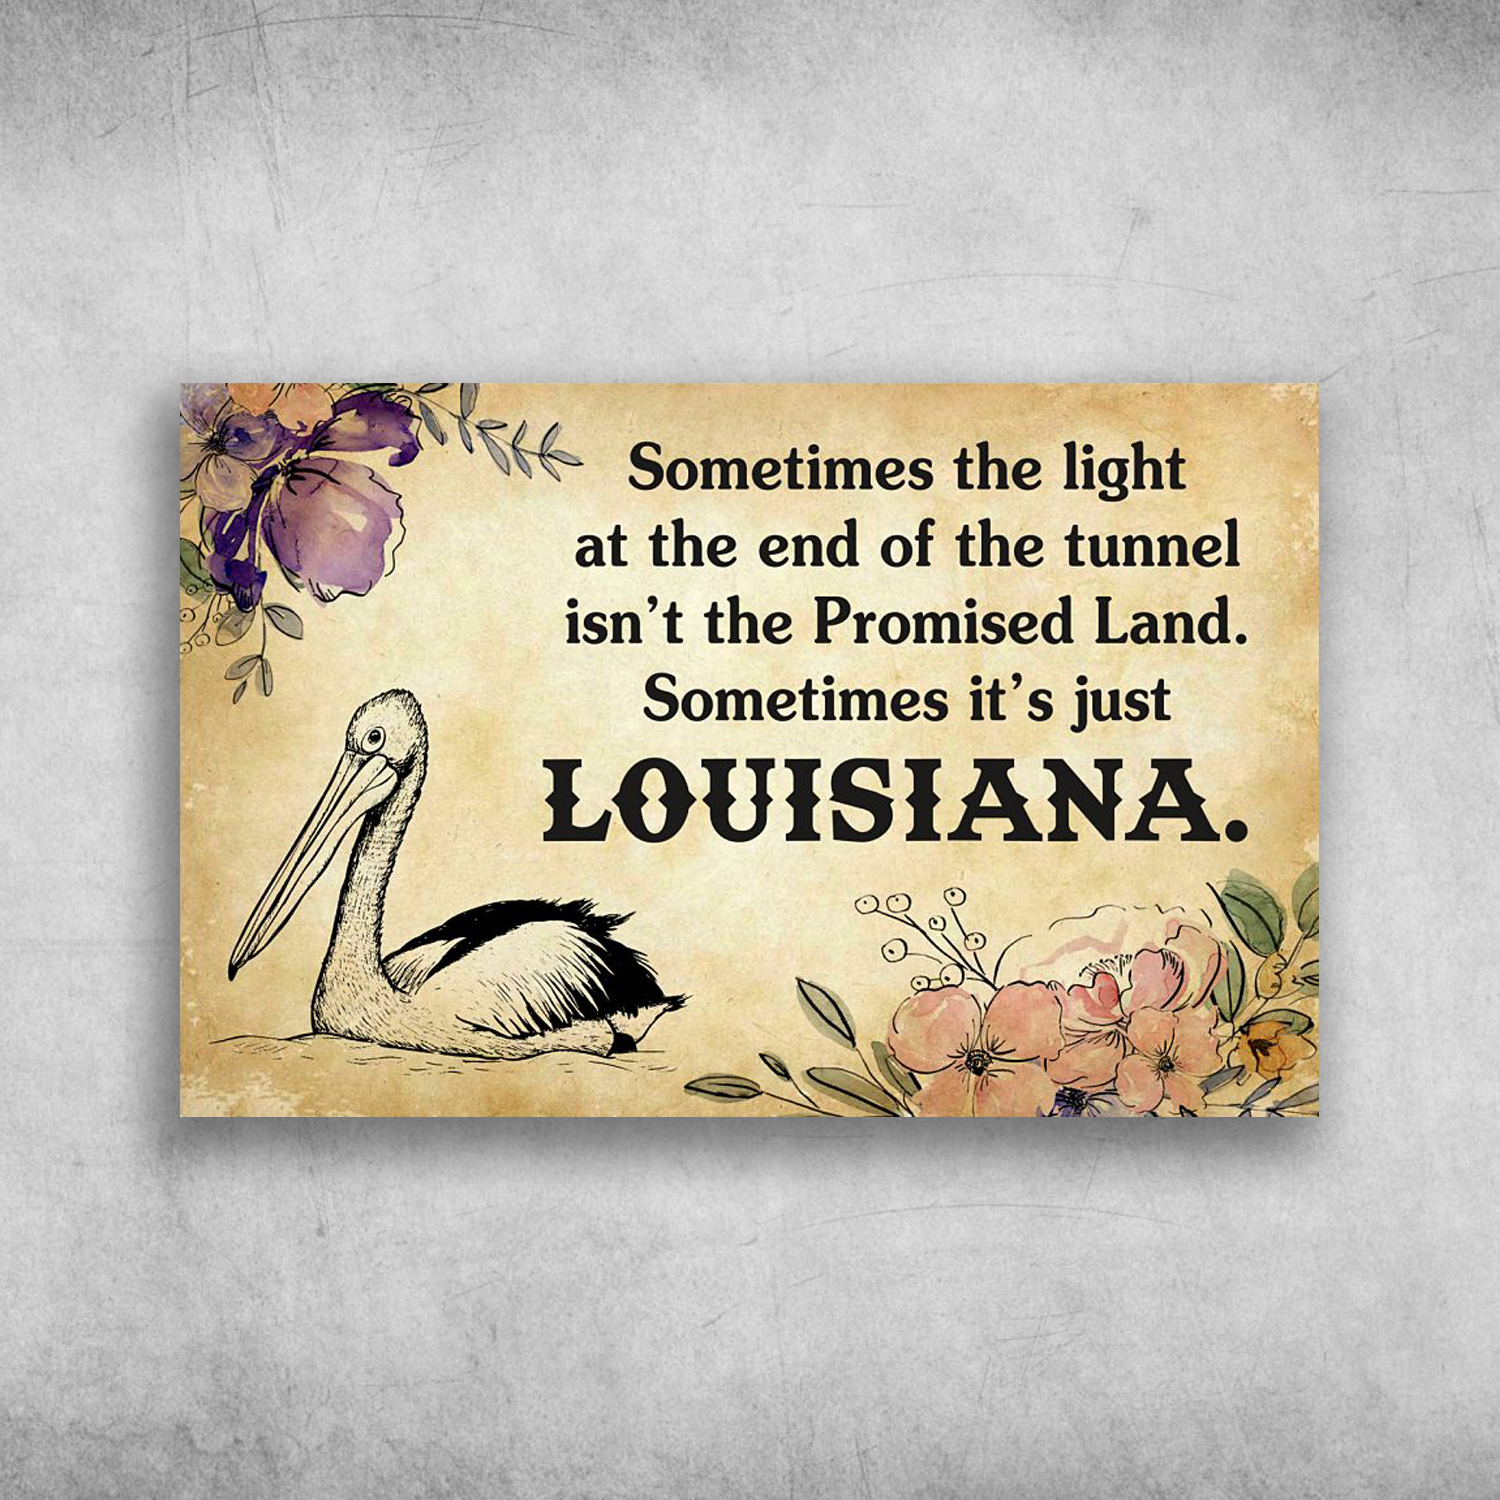 Sometimes It's Just Louisiana Sometimes The Light At The End At The Tunnel